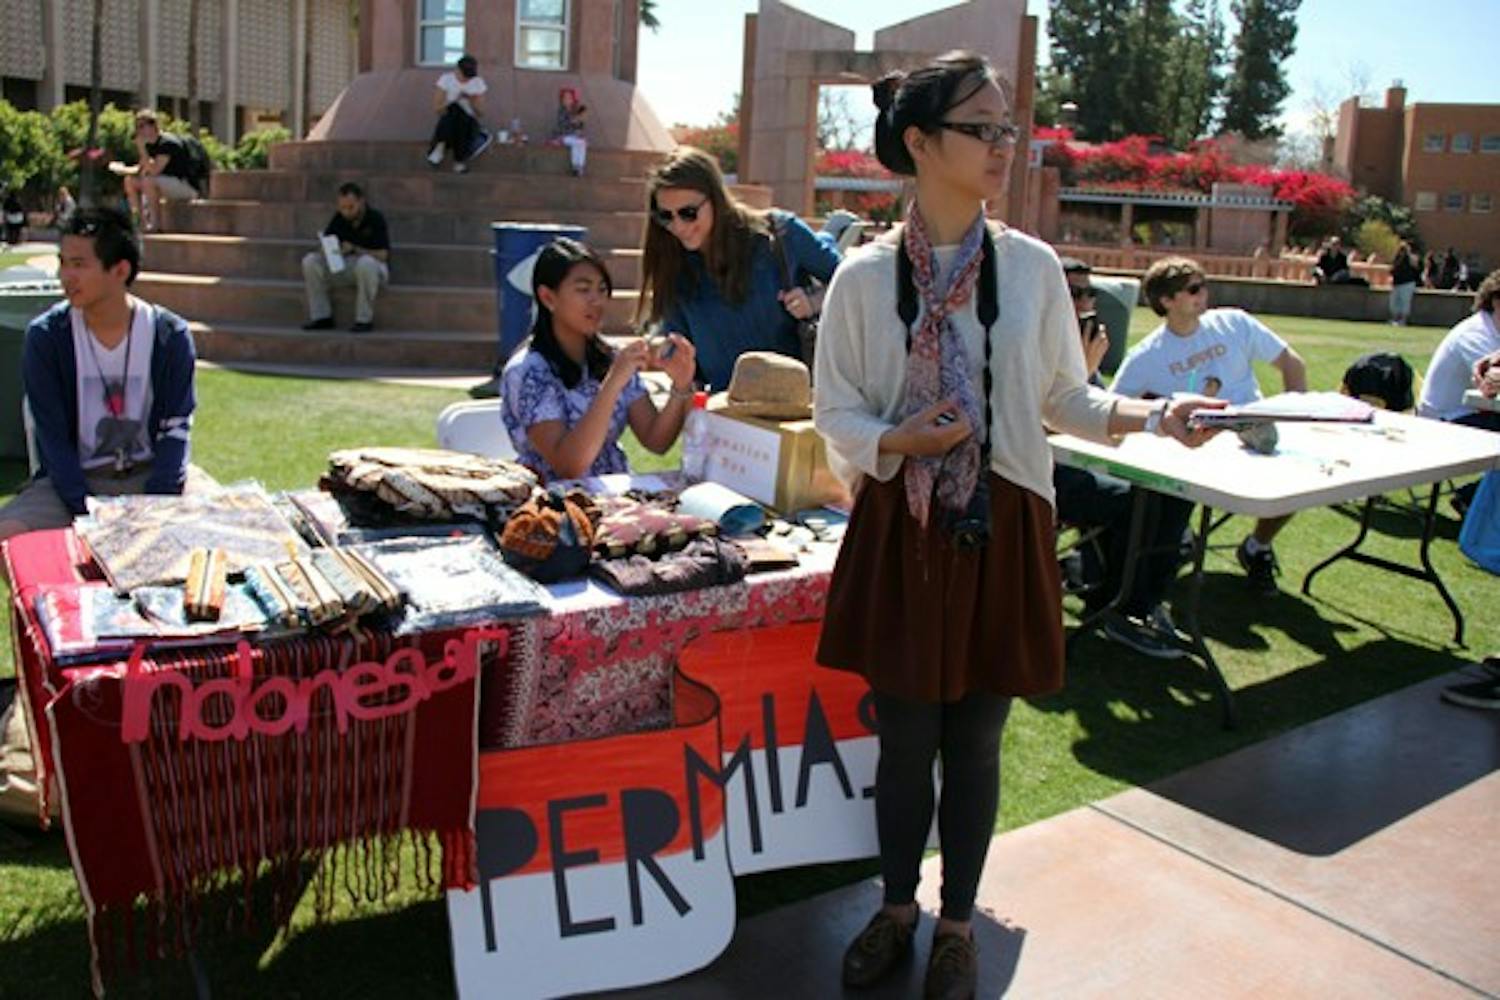 Student and Cultural Engagement sponsored World Fest on Hayden Lawn at the Tempe campus Tuesday, featuring international organizations across campus and the diverse foods, crafts and artifacts of their countries.  (Photo by Diana Lustig)